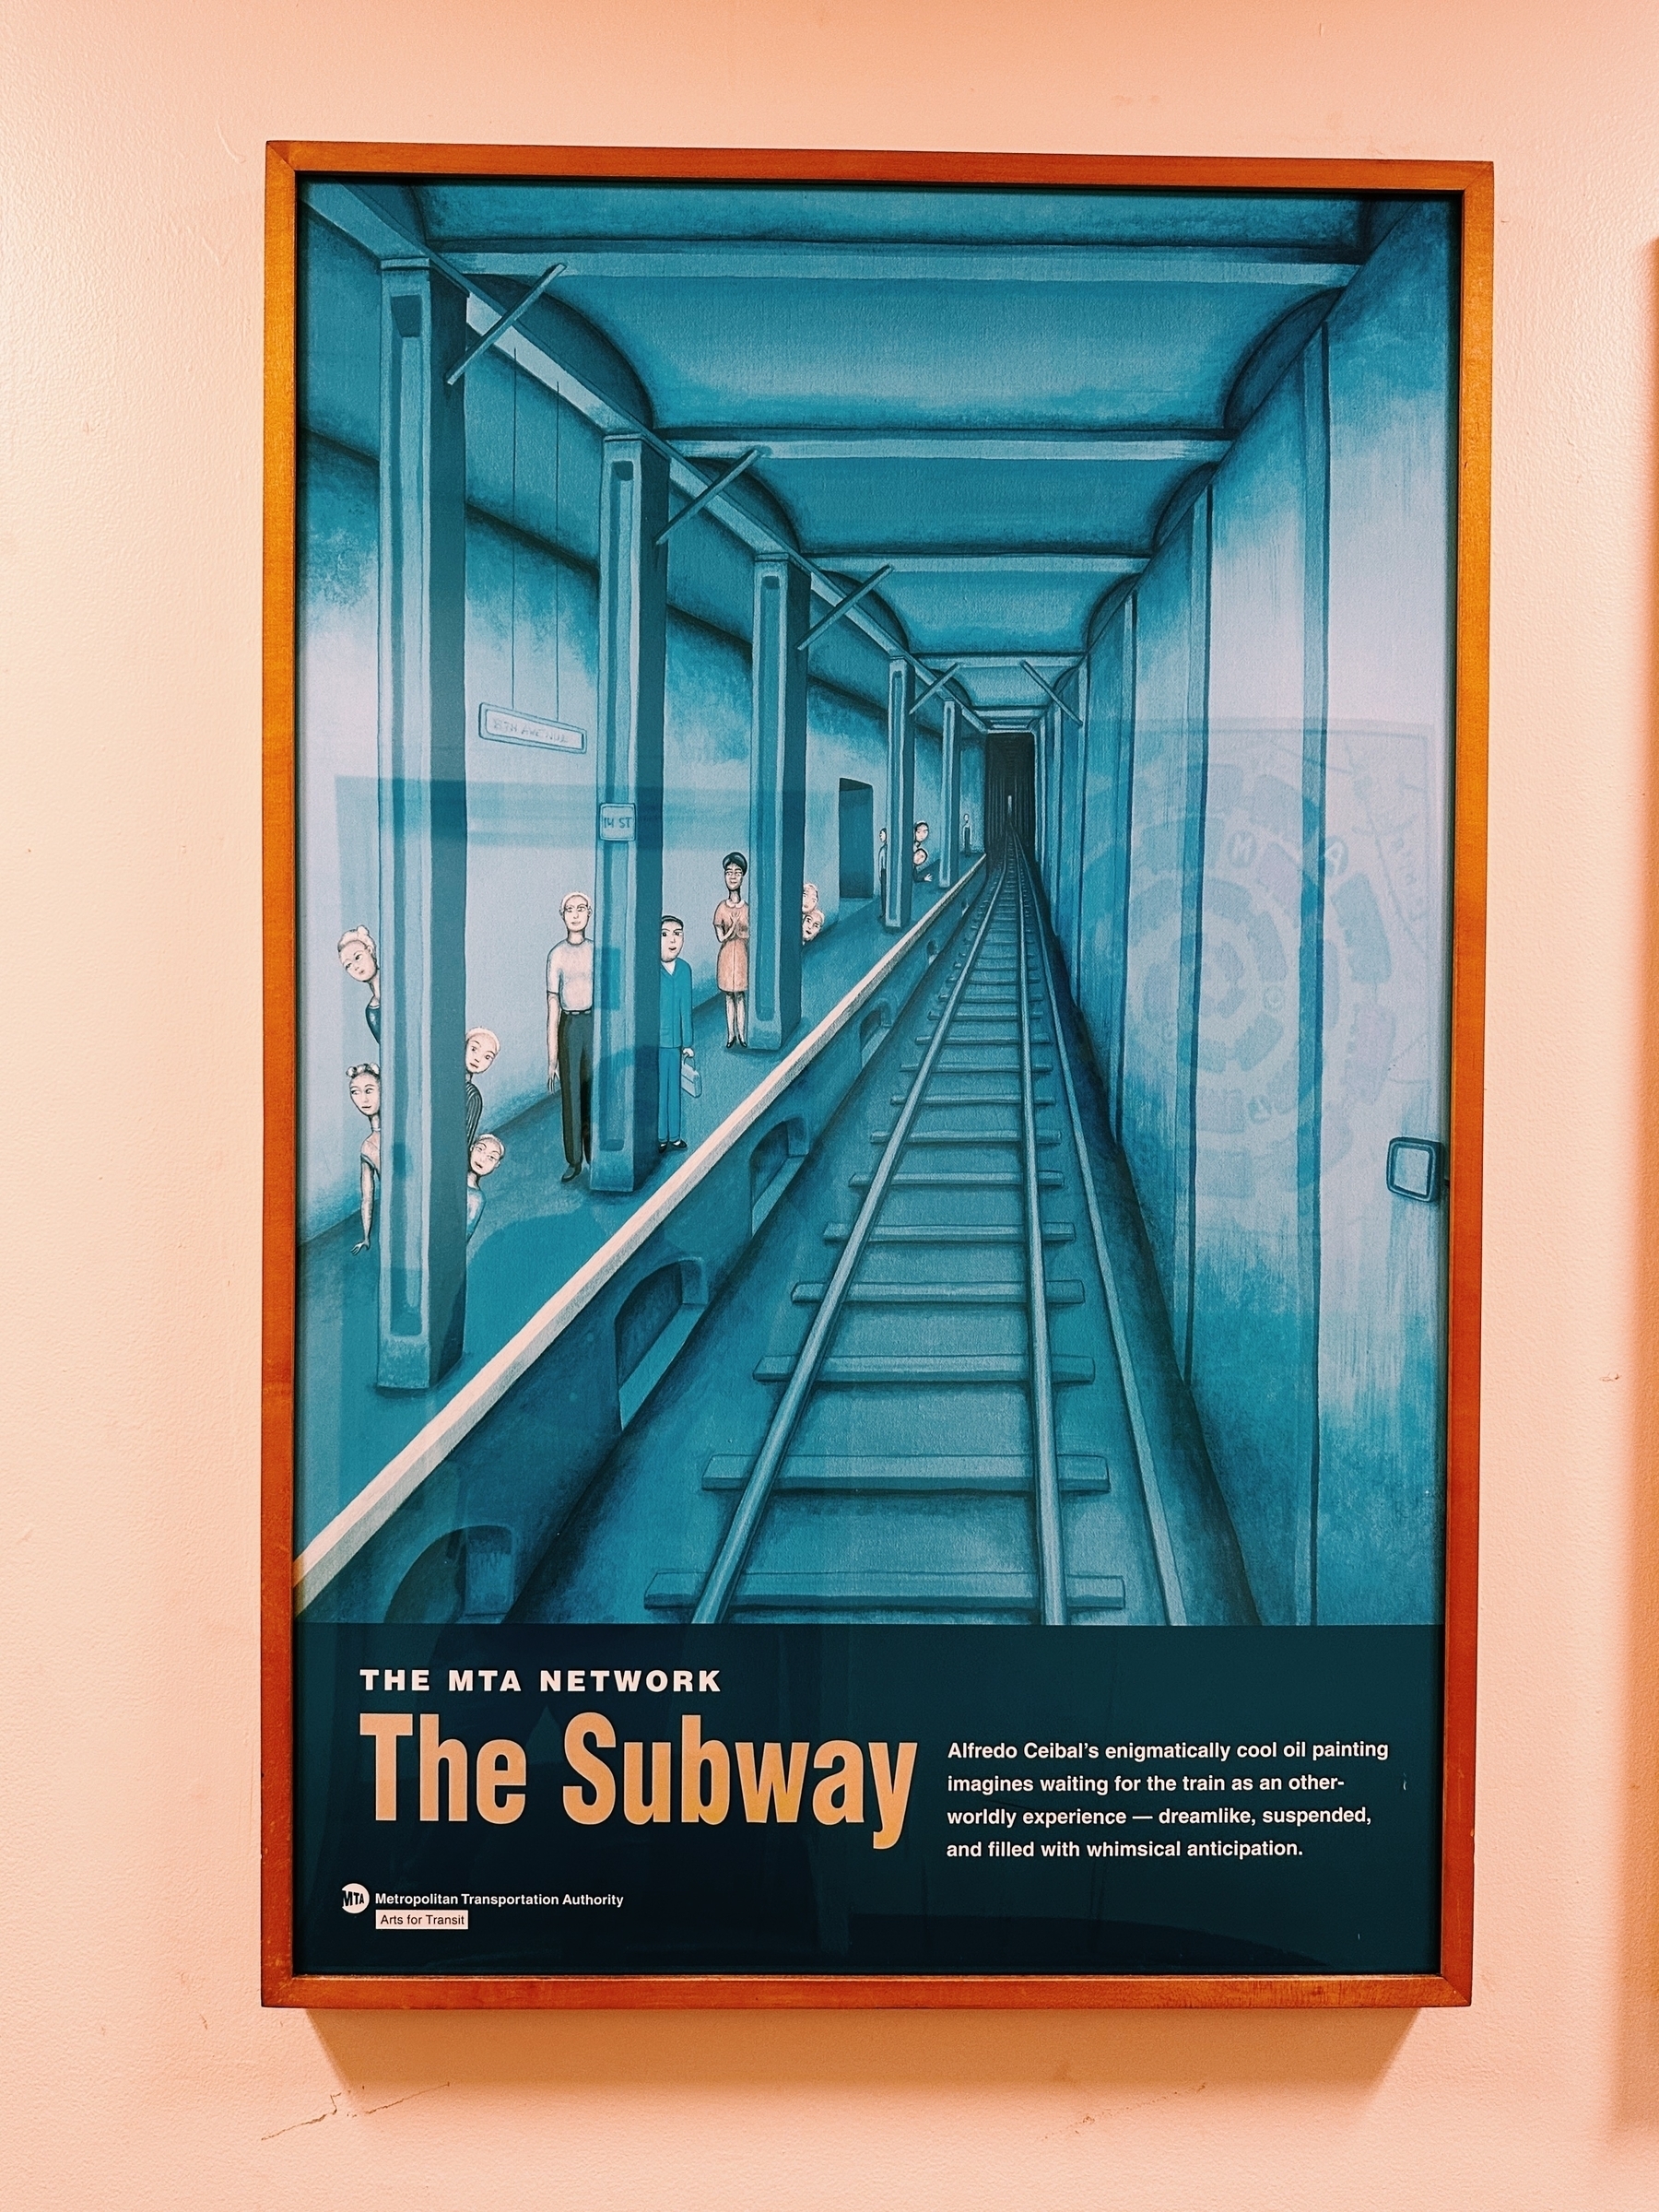 Art print called The Subway of a dimly lit train platform in art deco style